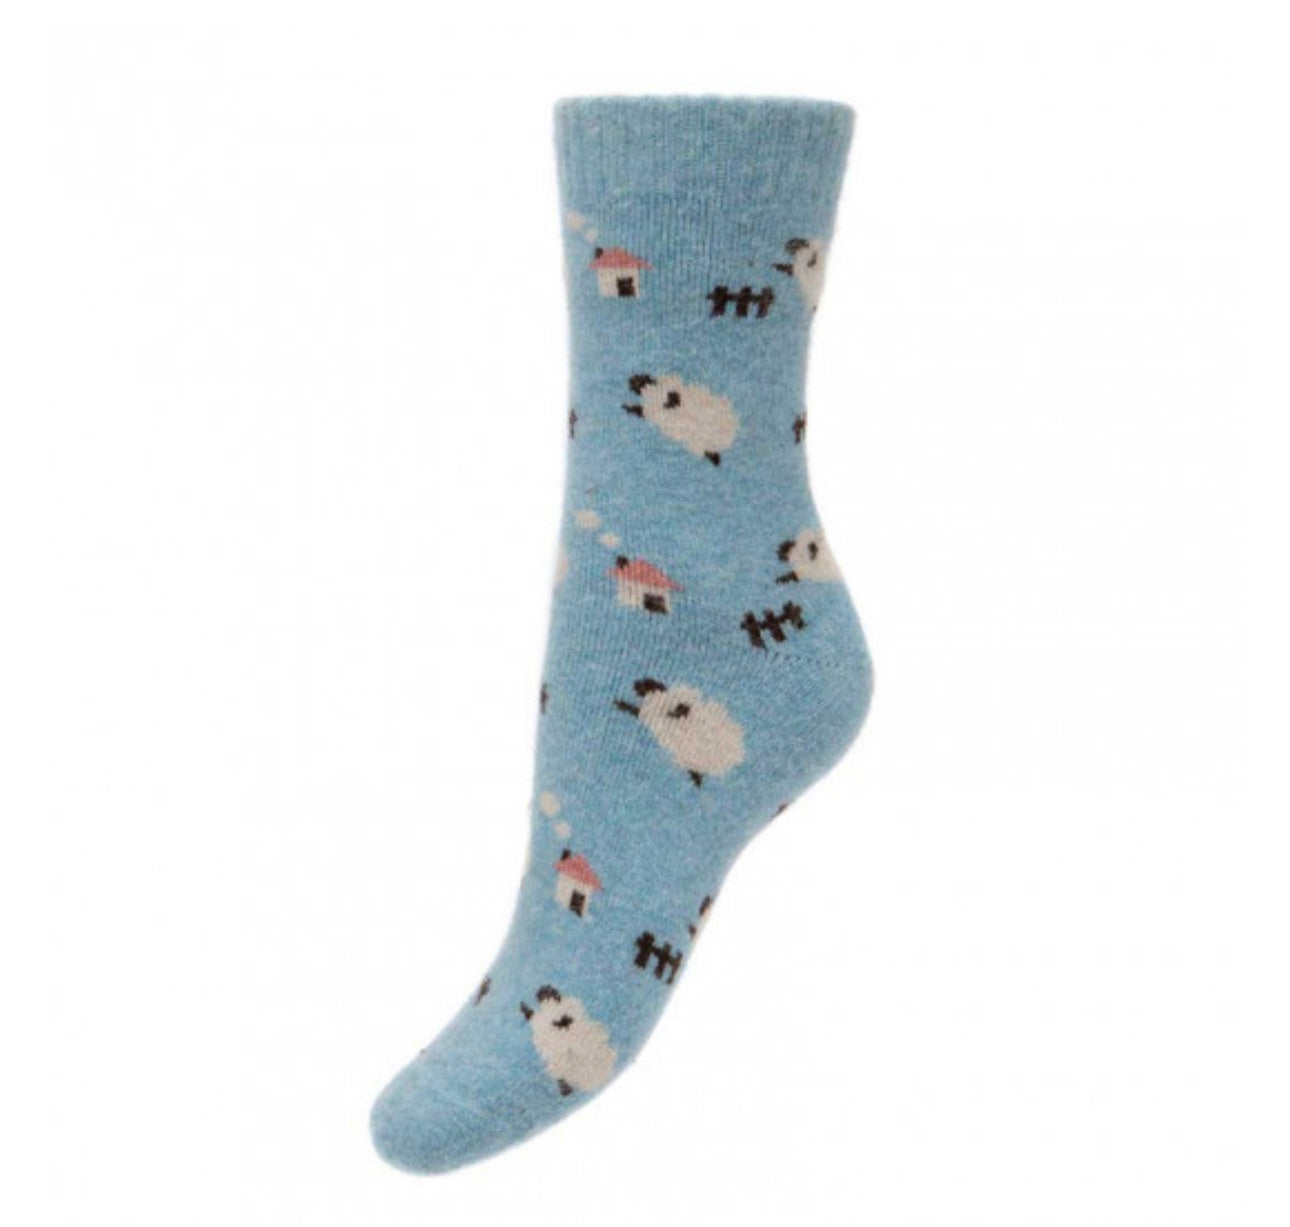 Wool Blend Socks with Sheep size 4-7 Ws332/3